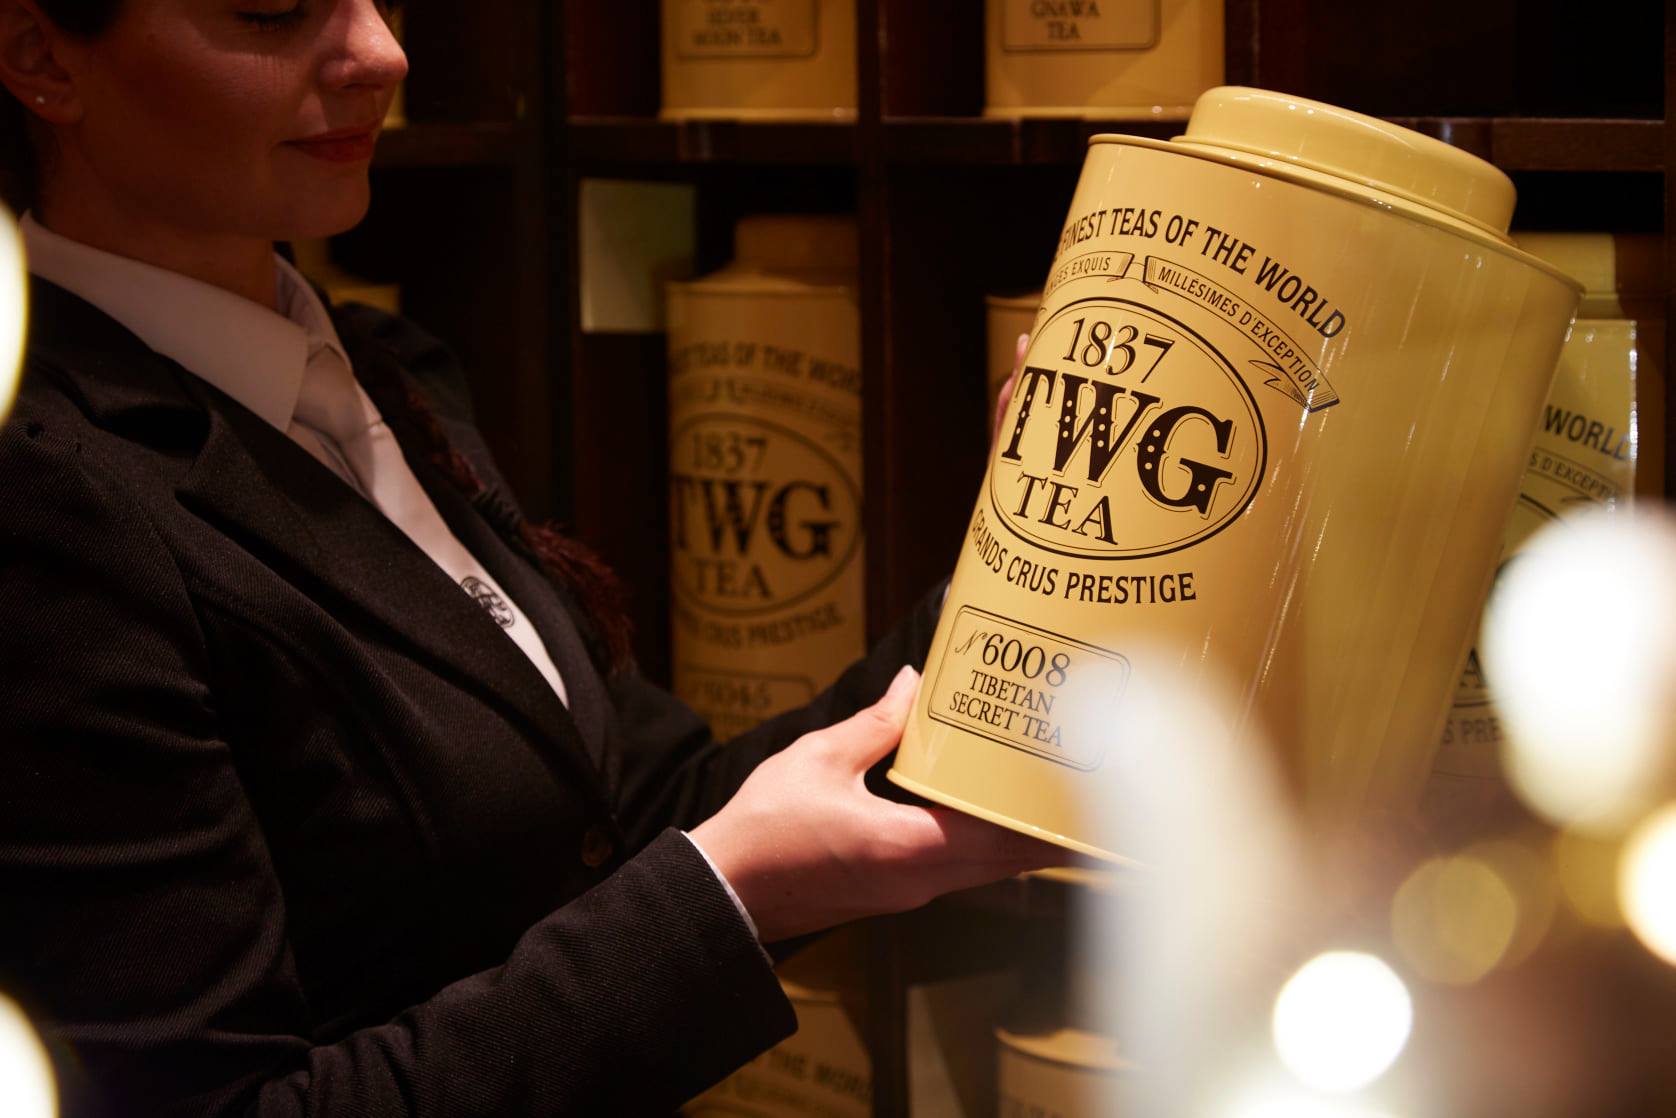 #NowInfusing: As dramatic and uplifting as the Himalayan plains, this remarkably delicate TWG Tea black tea is blended with sweet fruits and spicy overtones to soothe and revive the spirit. #TWGTeaOfficial